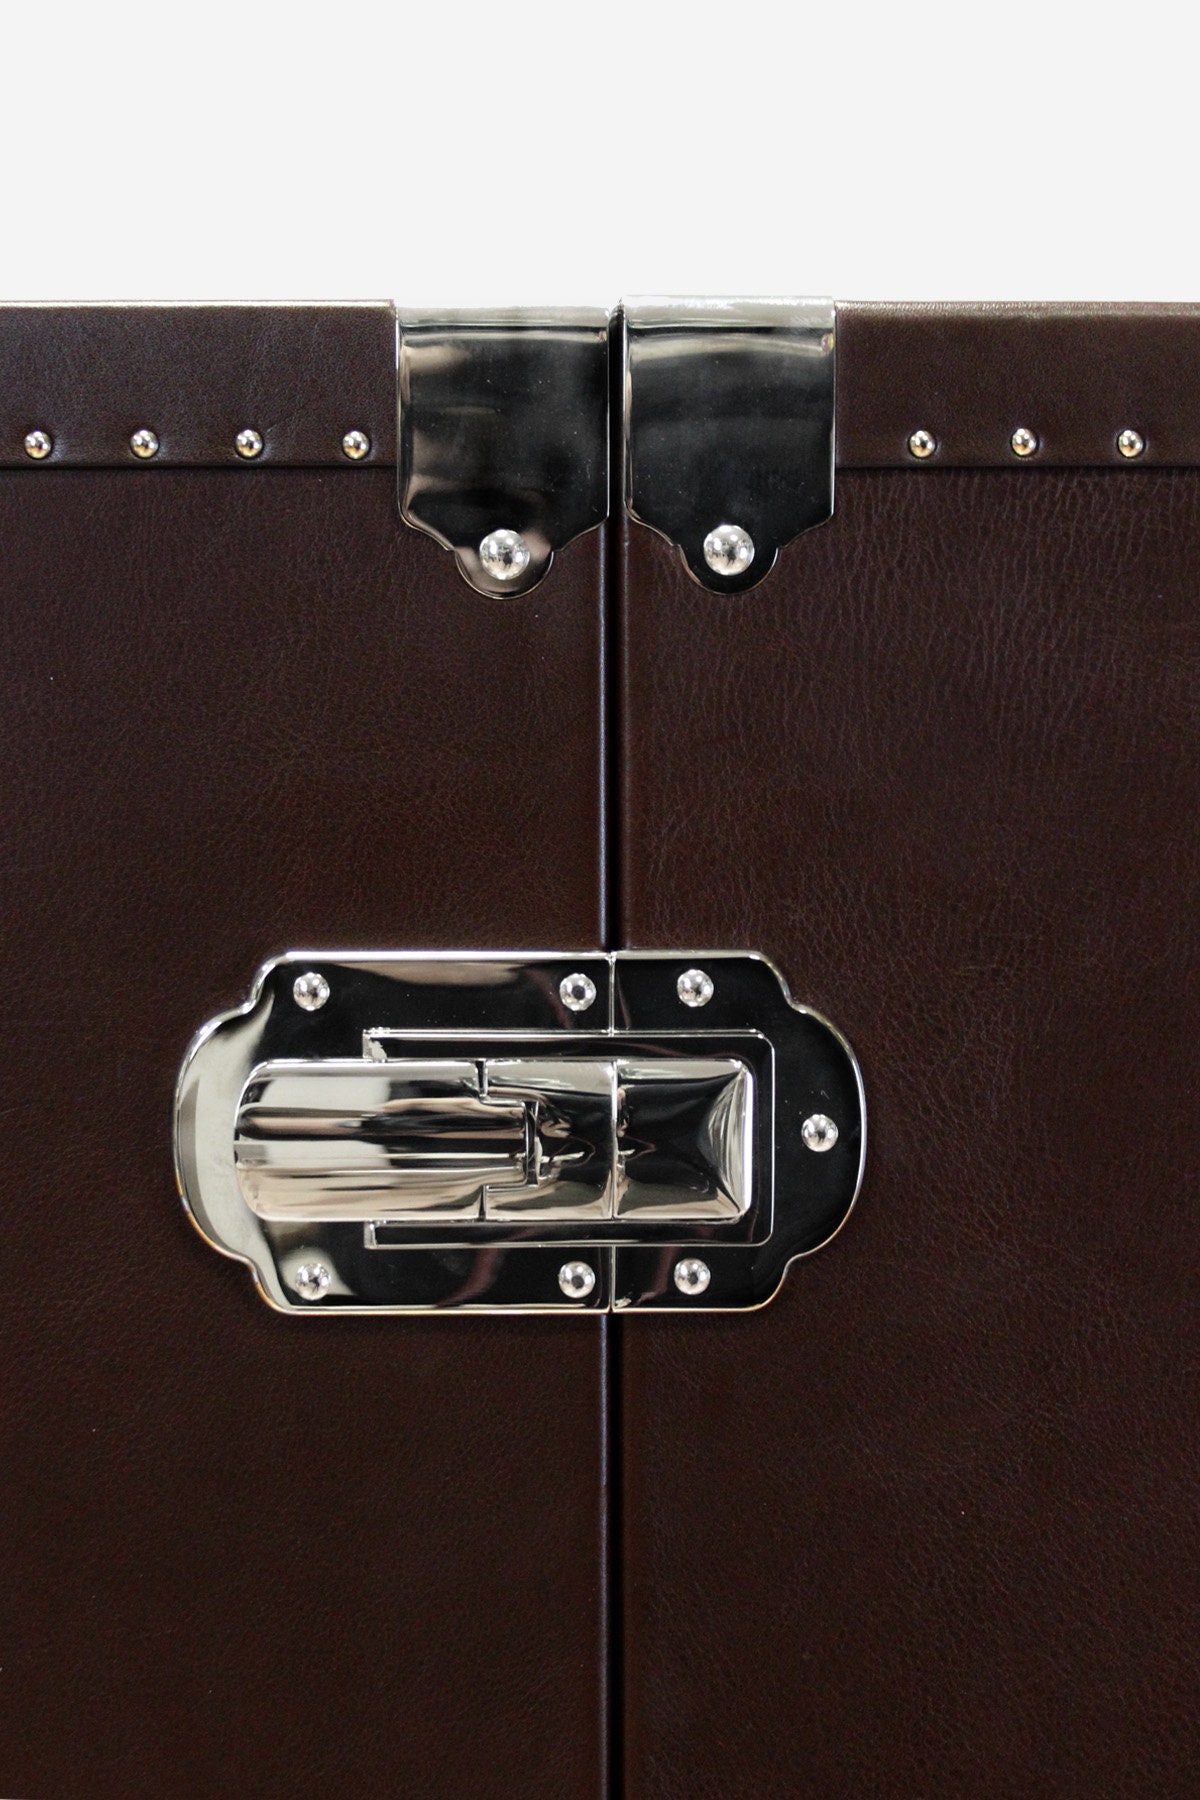  Royal Garment Leather Bag, Handmade to Order in Italy